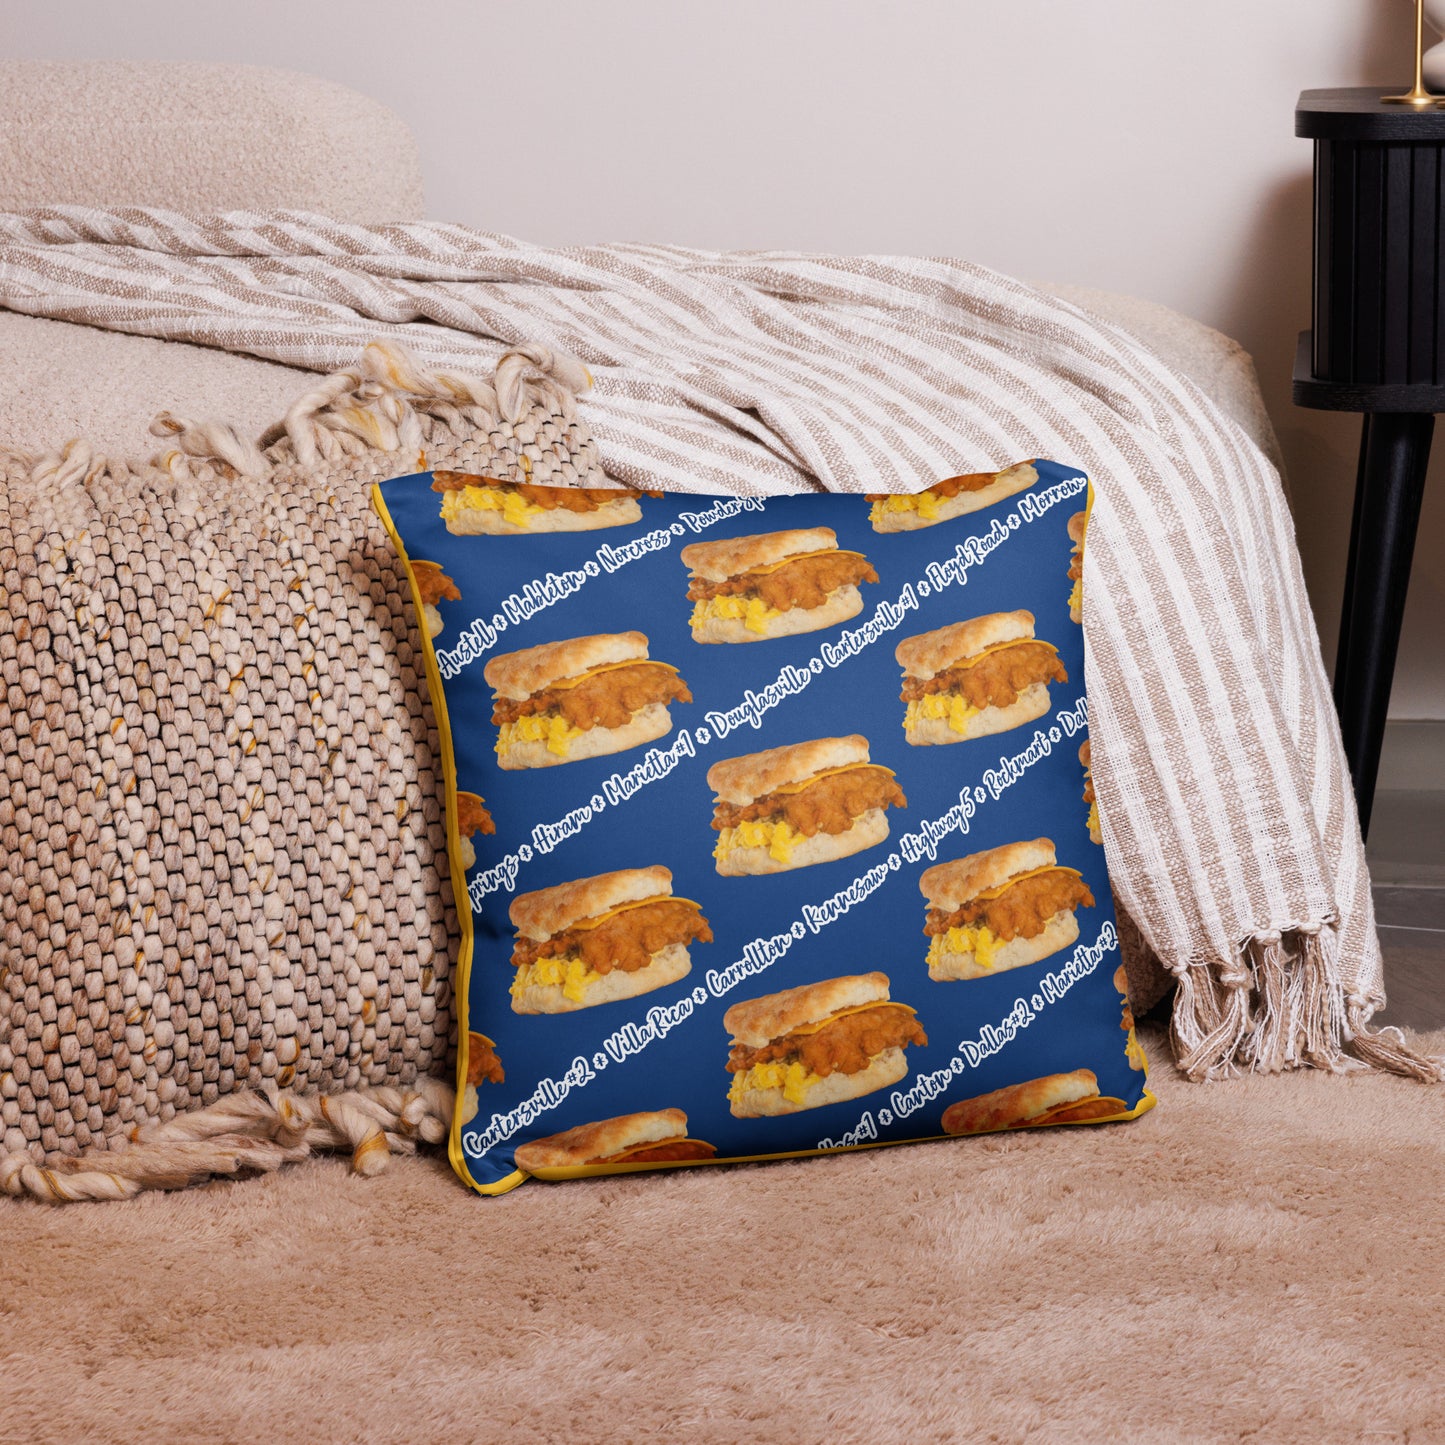 Dreaming of Martin's Biscuits Pillow - Chicken, Egg & Cheese